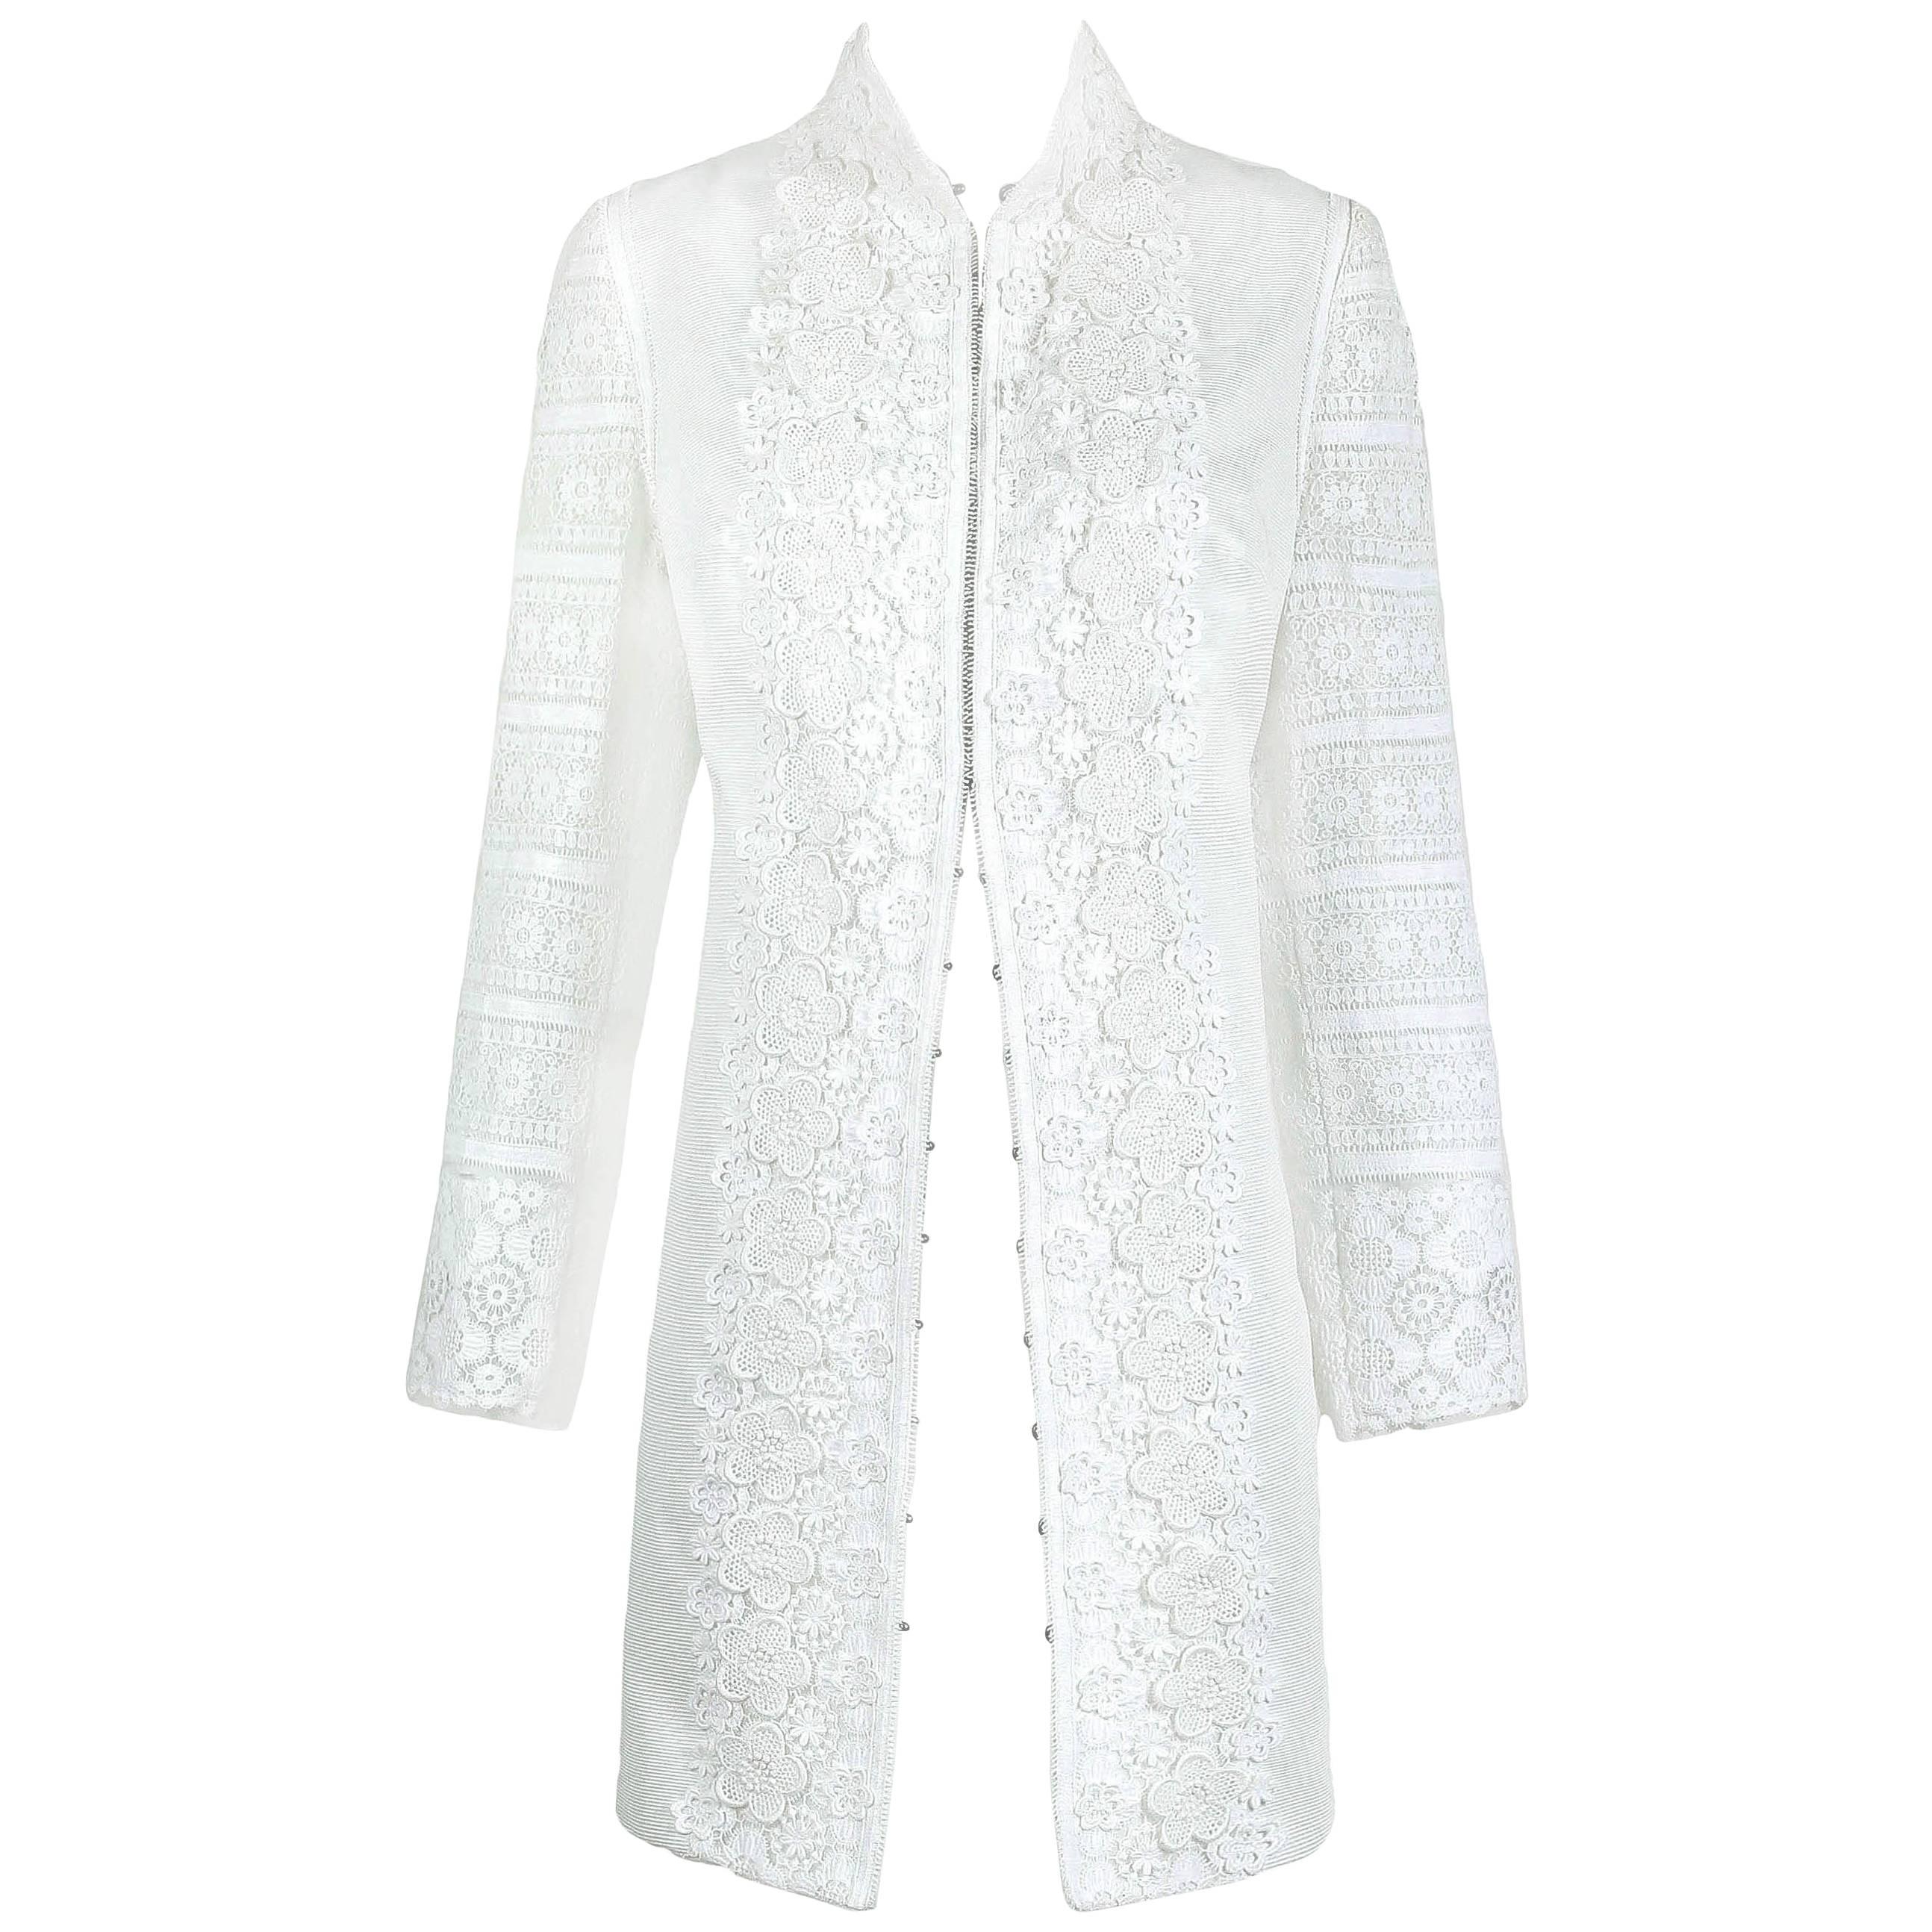 2010 Andrew Gn Atelier White Lace Long Sleeved Jacket Coat